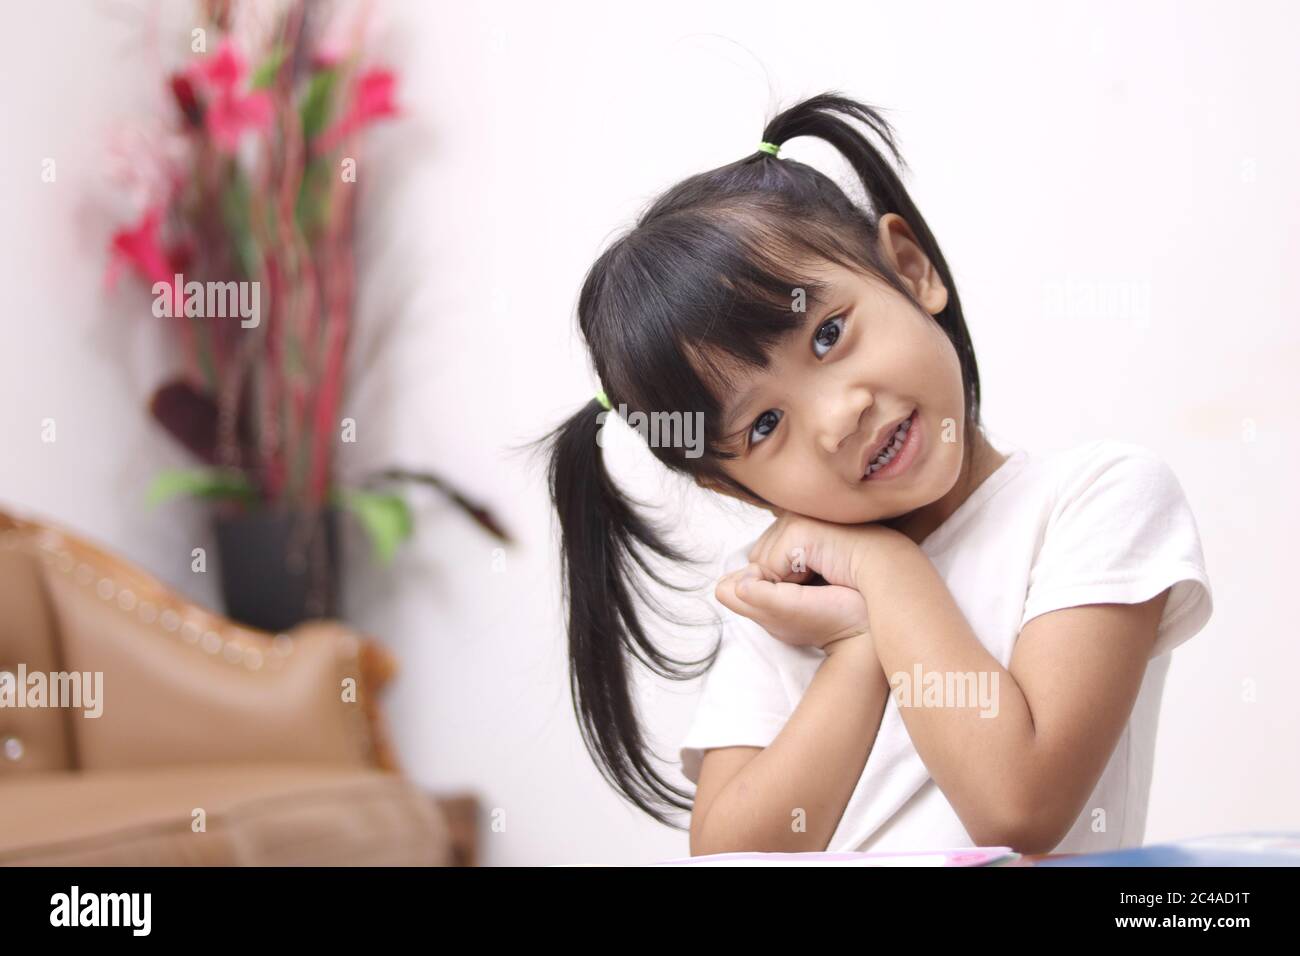 Cute adorable little Asian baby girl with pony tail hair looking at camera and smiling, happy joy excited expression when learning at home Stock Photo